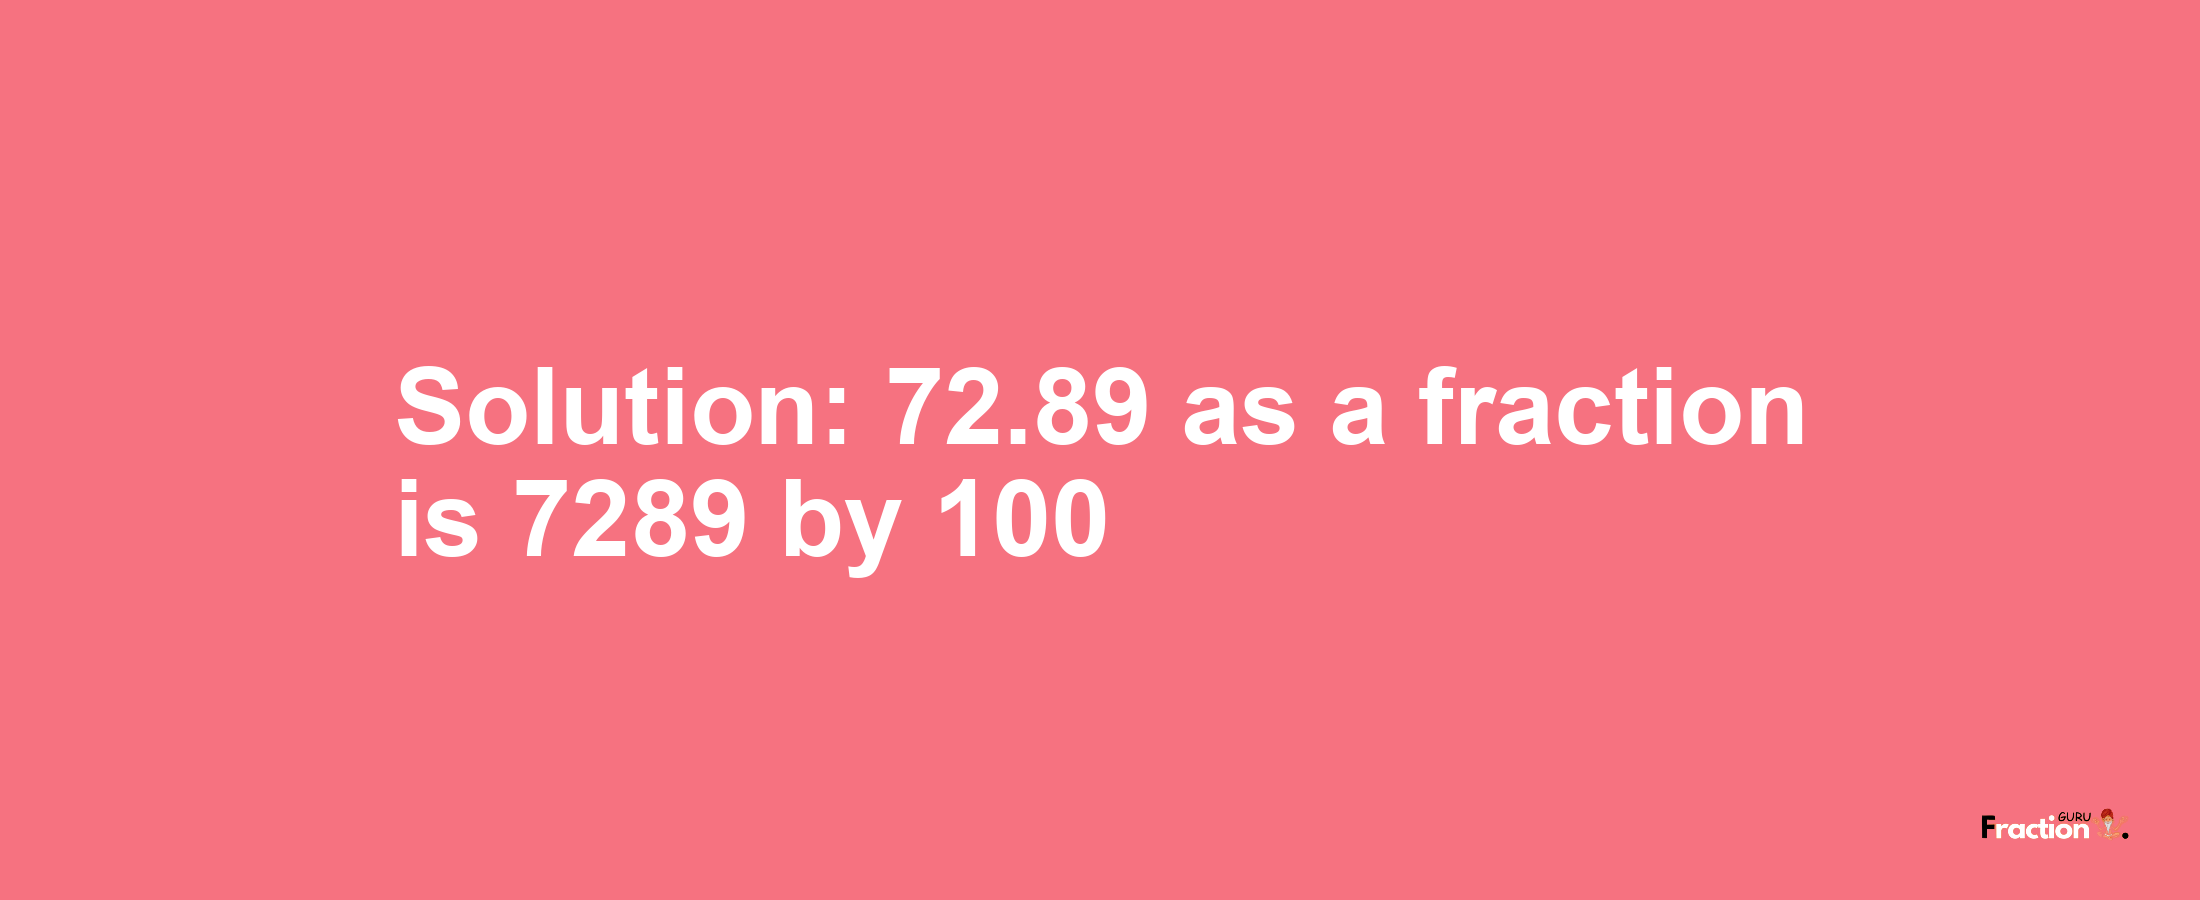 Solution:72.89 as a fraction is 7289/100